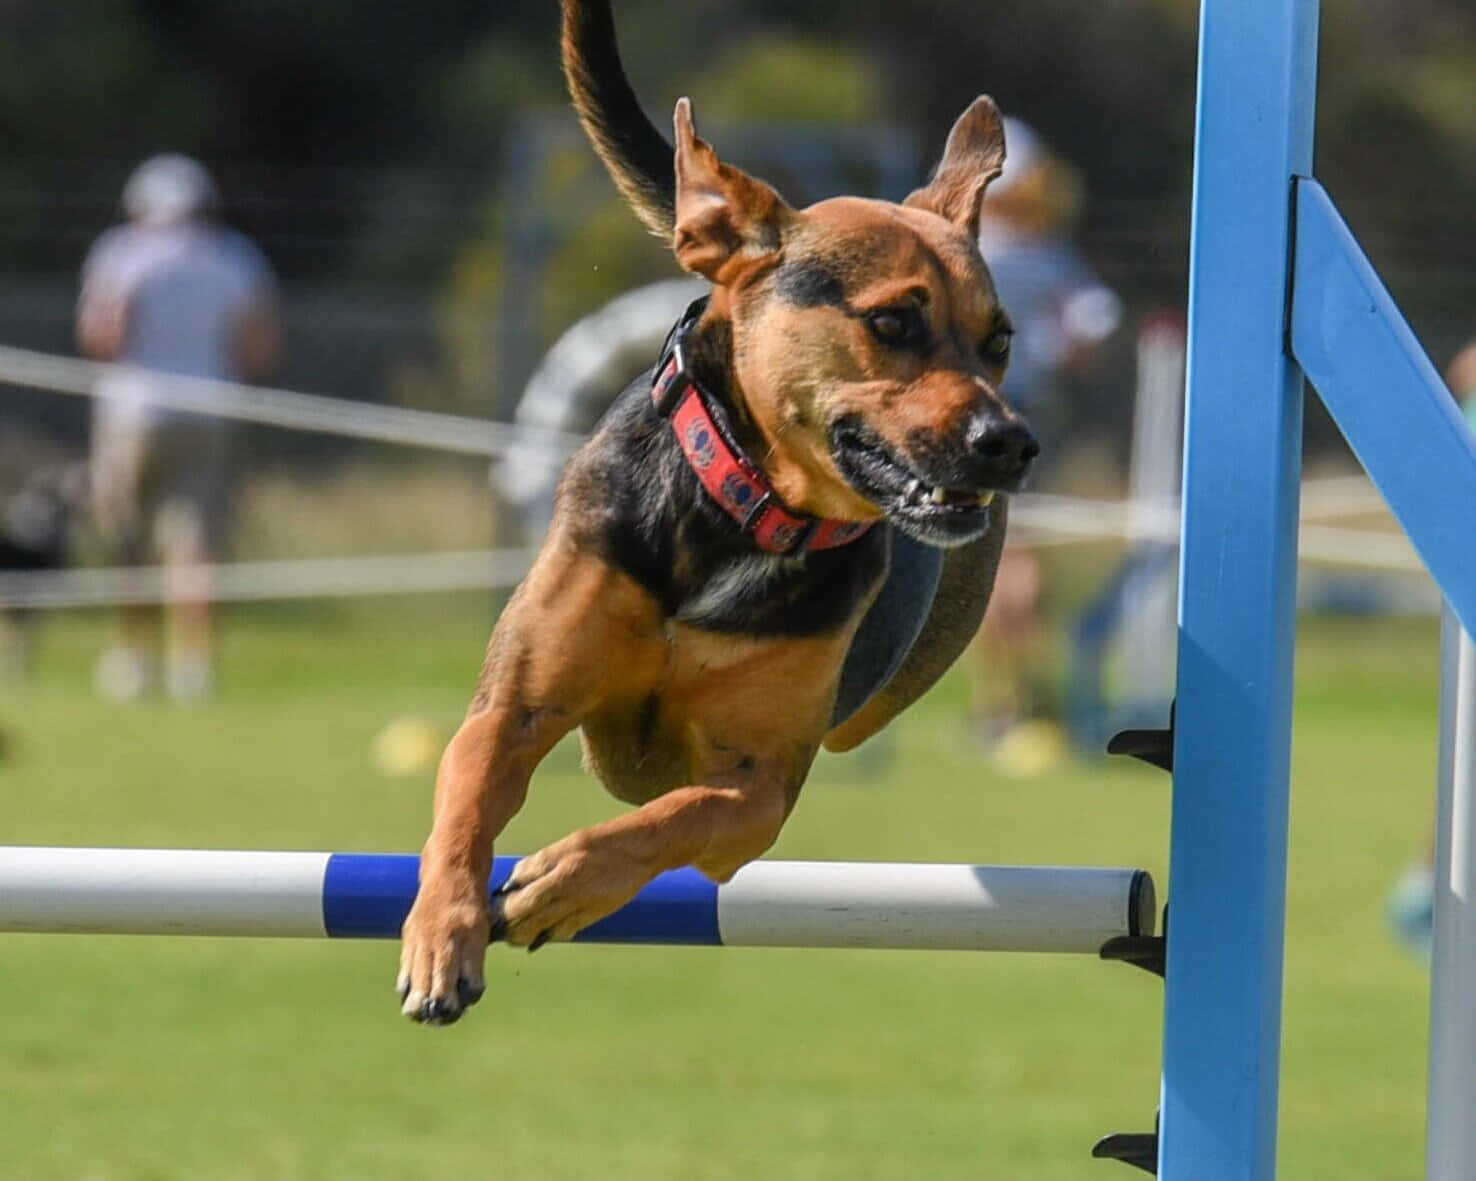 Athletic Dog Catching Frisbee In Mid-air Wallpaper